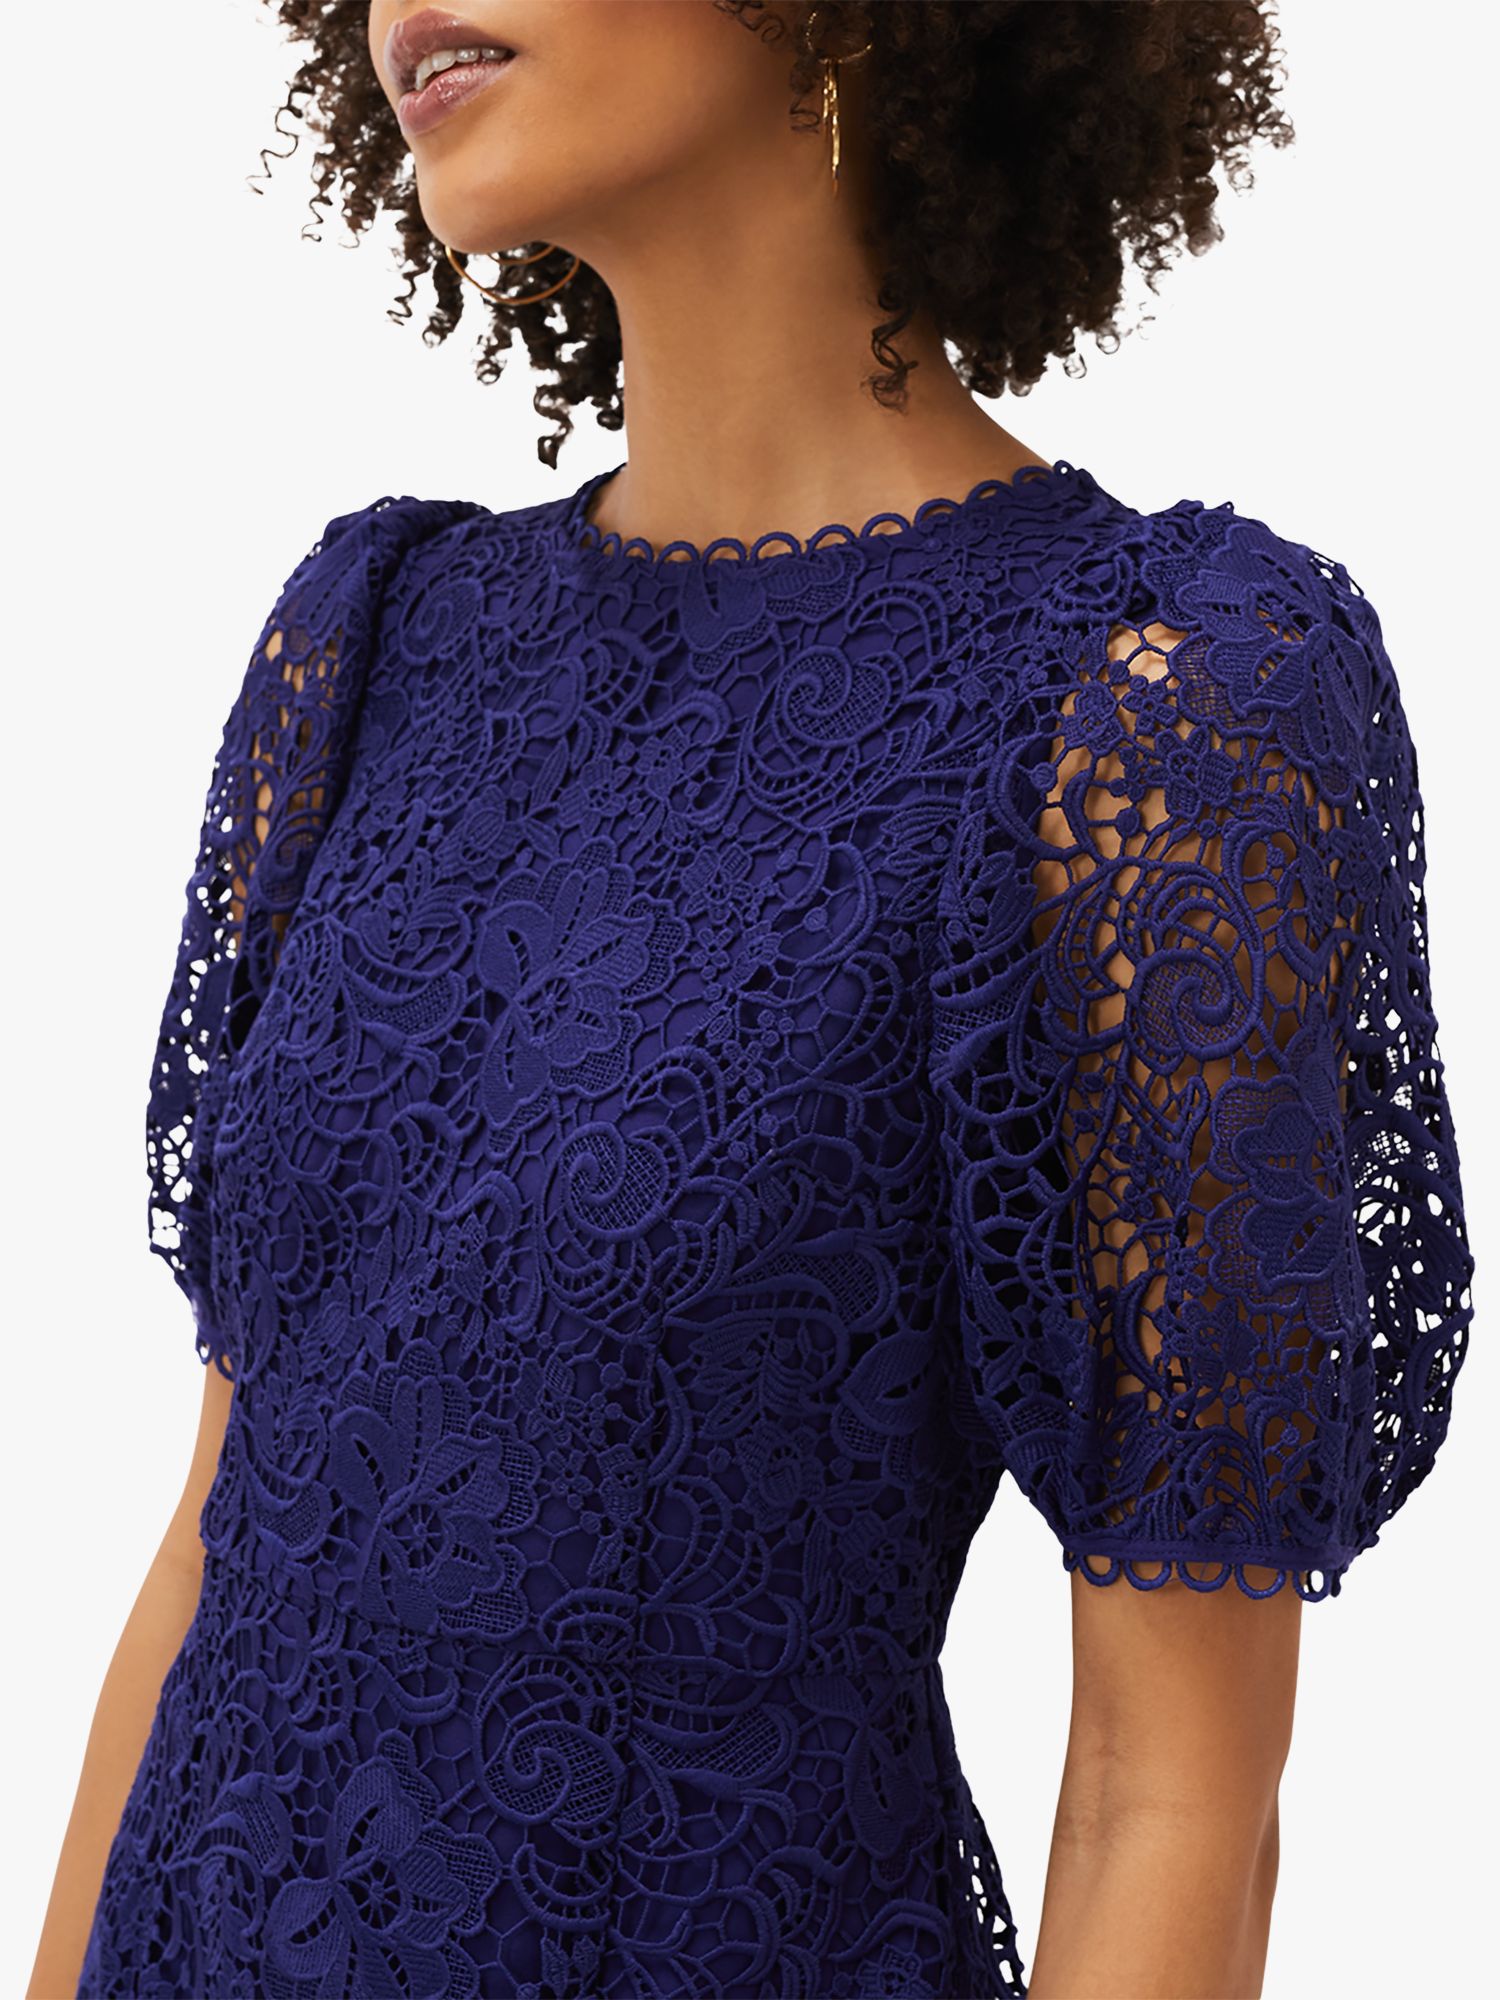 Phase Eight Lidia Guipure Lace Dress, Violet at John Lewis & Partners